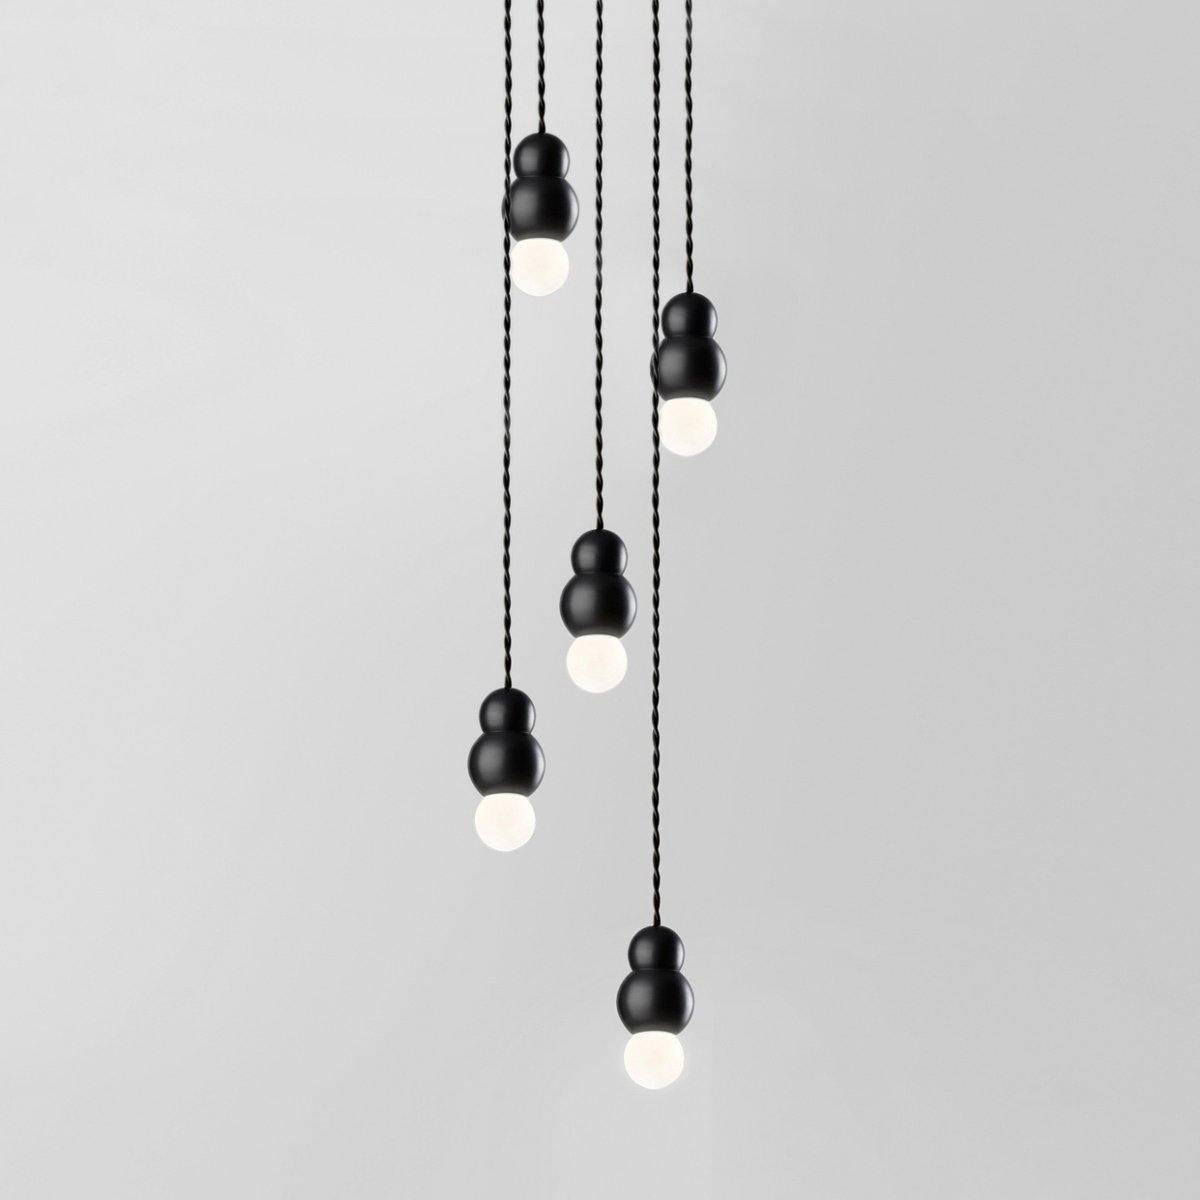 Black Ball Light Pendant Series with 5 heads, measuring 3.9 inches in diameter and 6.81 inches in height (10cm x 17.3cm). Features a flexible design.